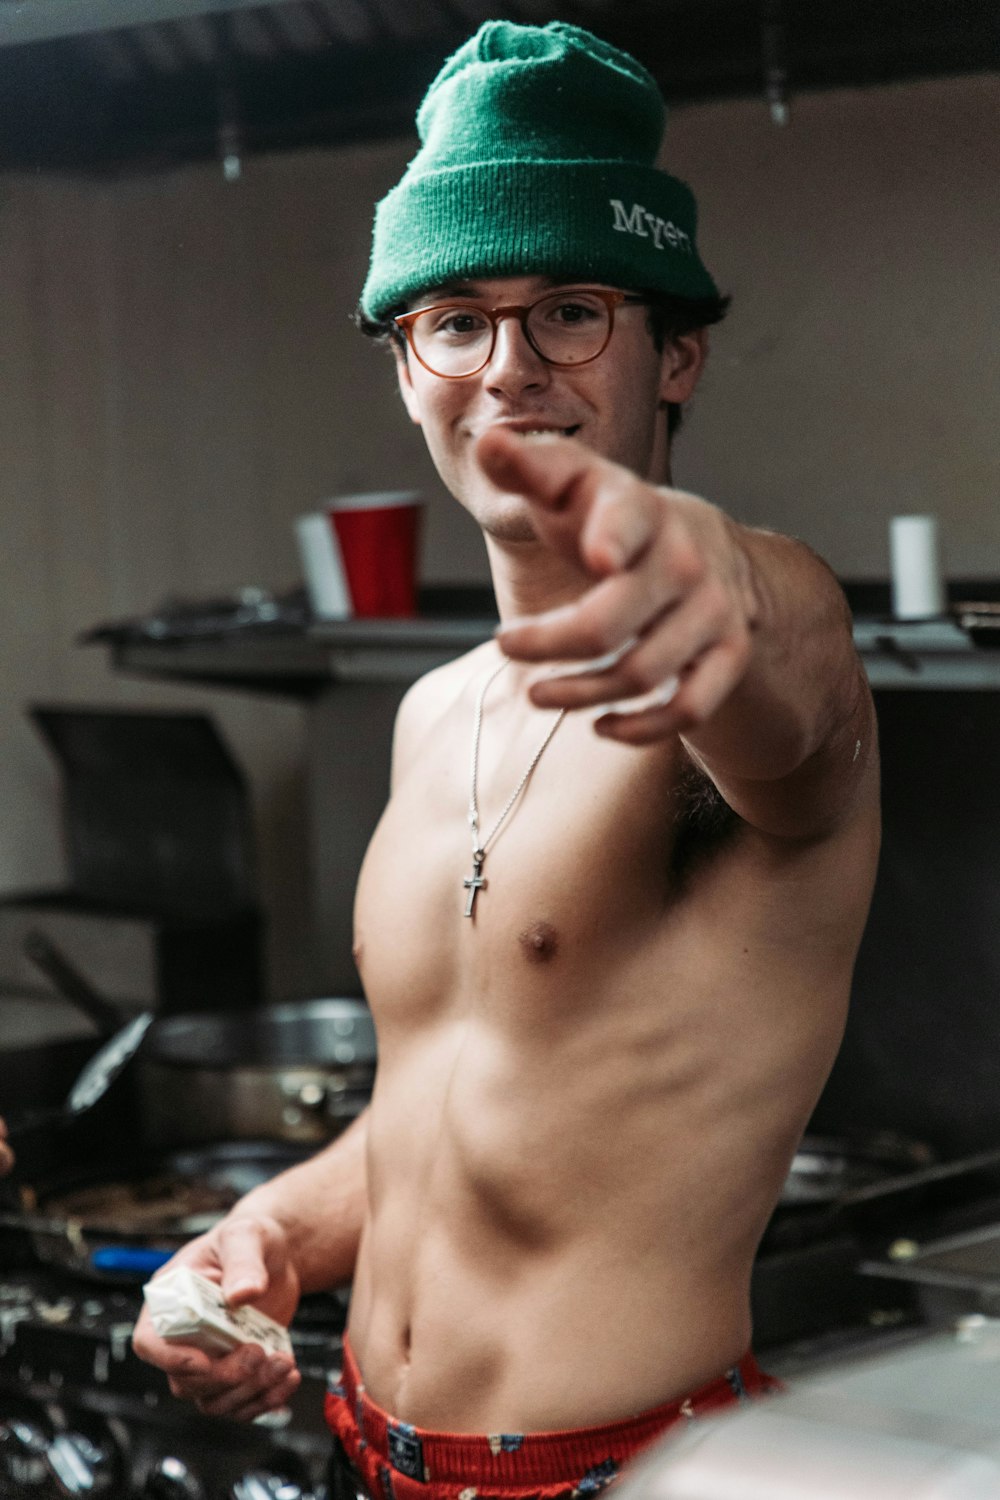 a shirtless man wearing a green hat pointing at the camera